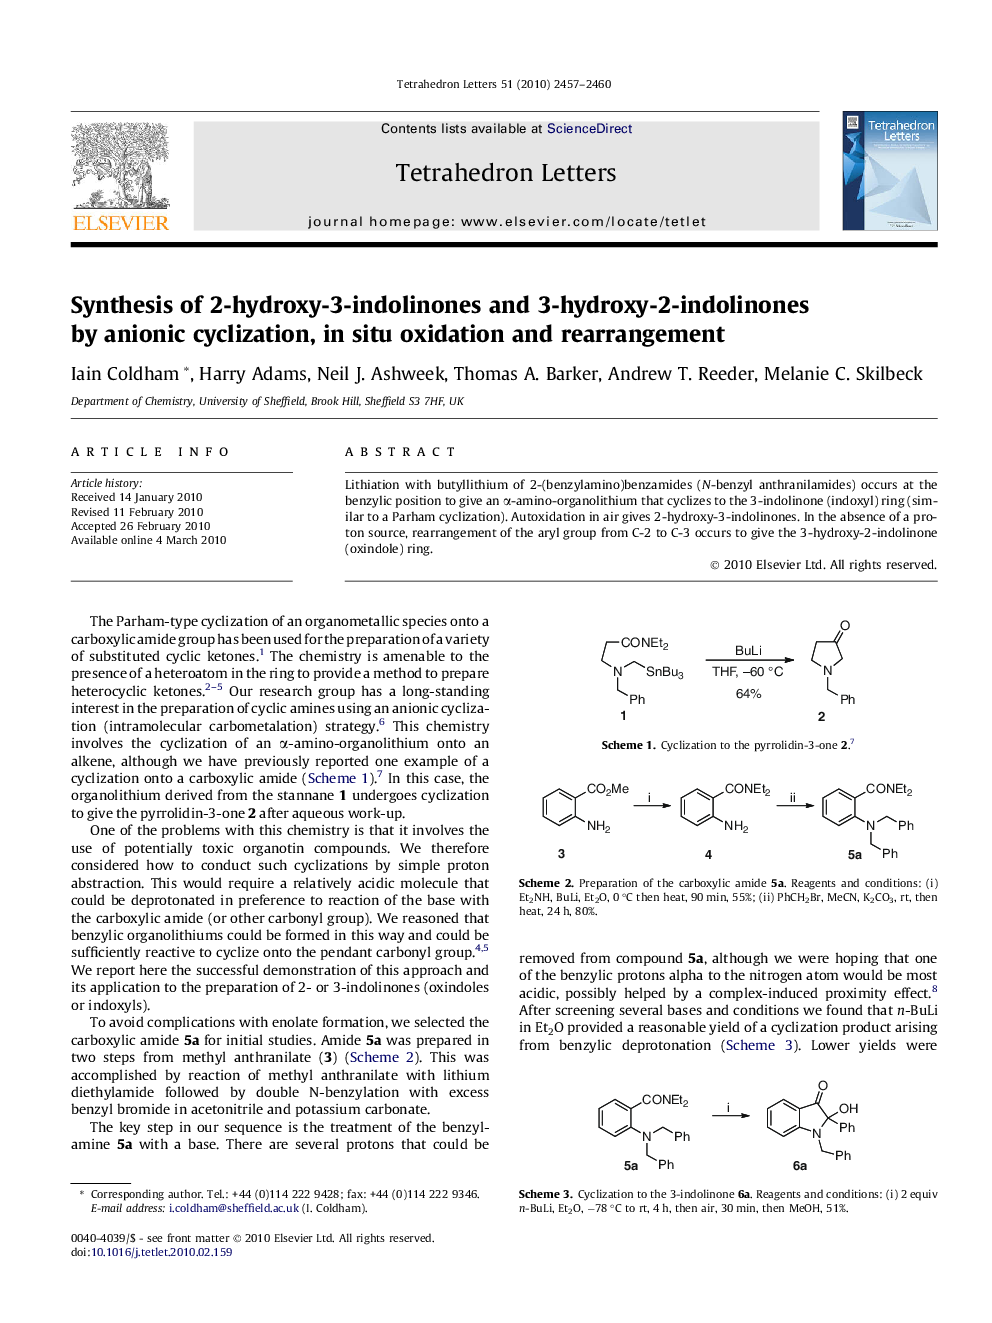 Synthesis of 2-hydroxy-3-indolinones and 3-hydroxy-2-indolinones by anionic cyclization, in situ oxidation and rearrangement